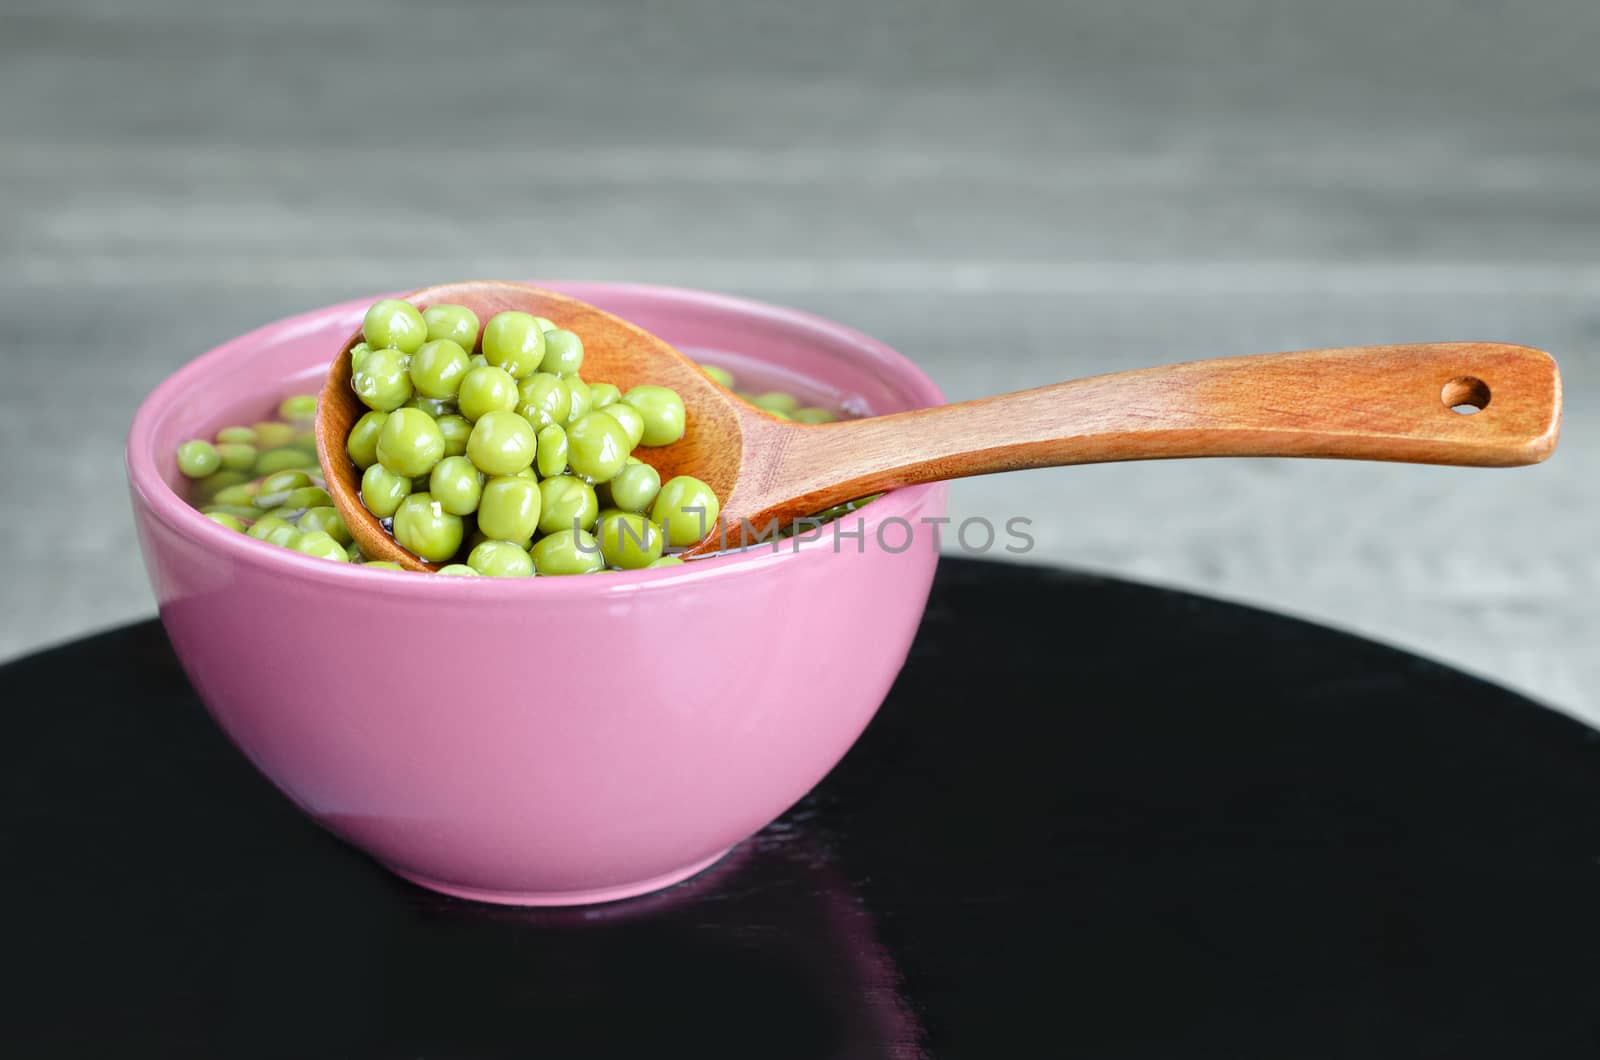 Green peas in a bowl and a wooden spoon. Old black surface and gray wooden background.